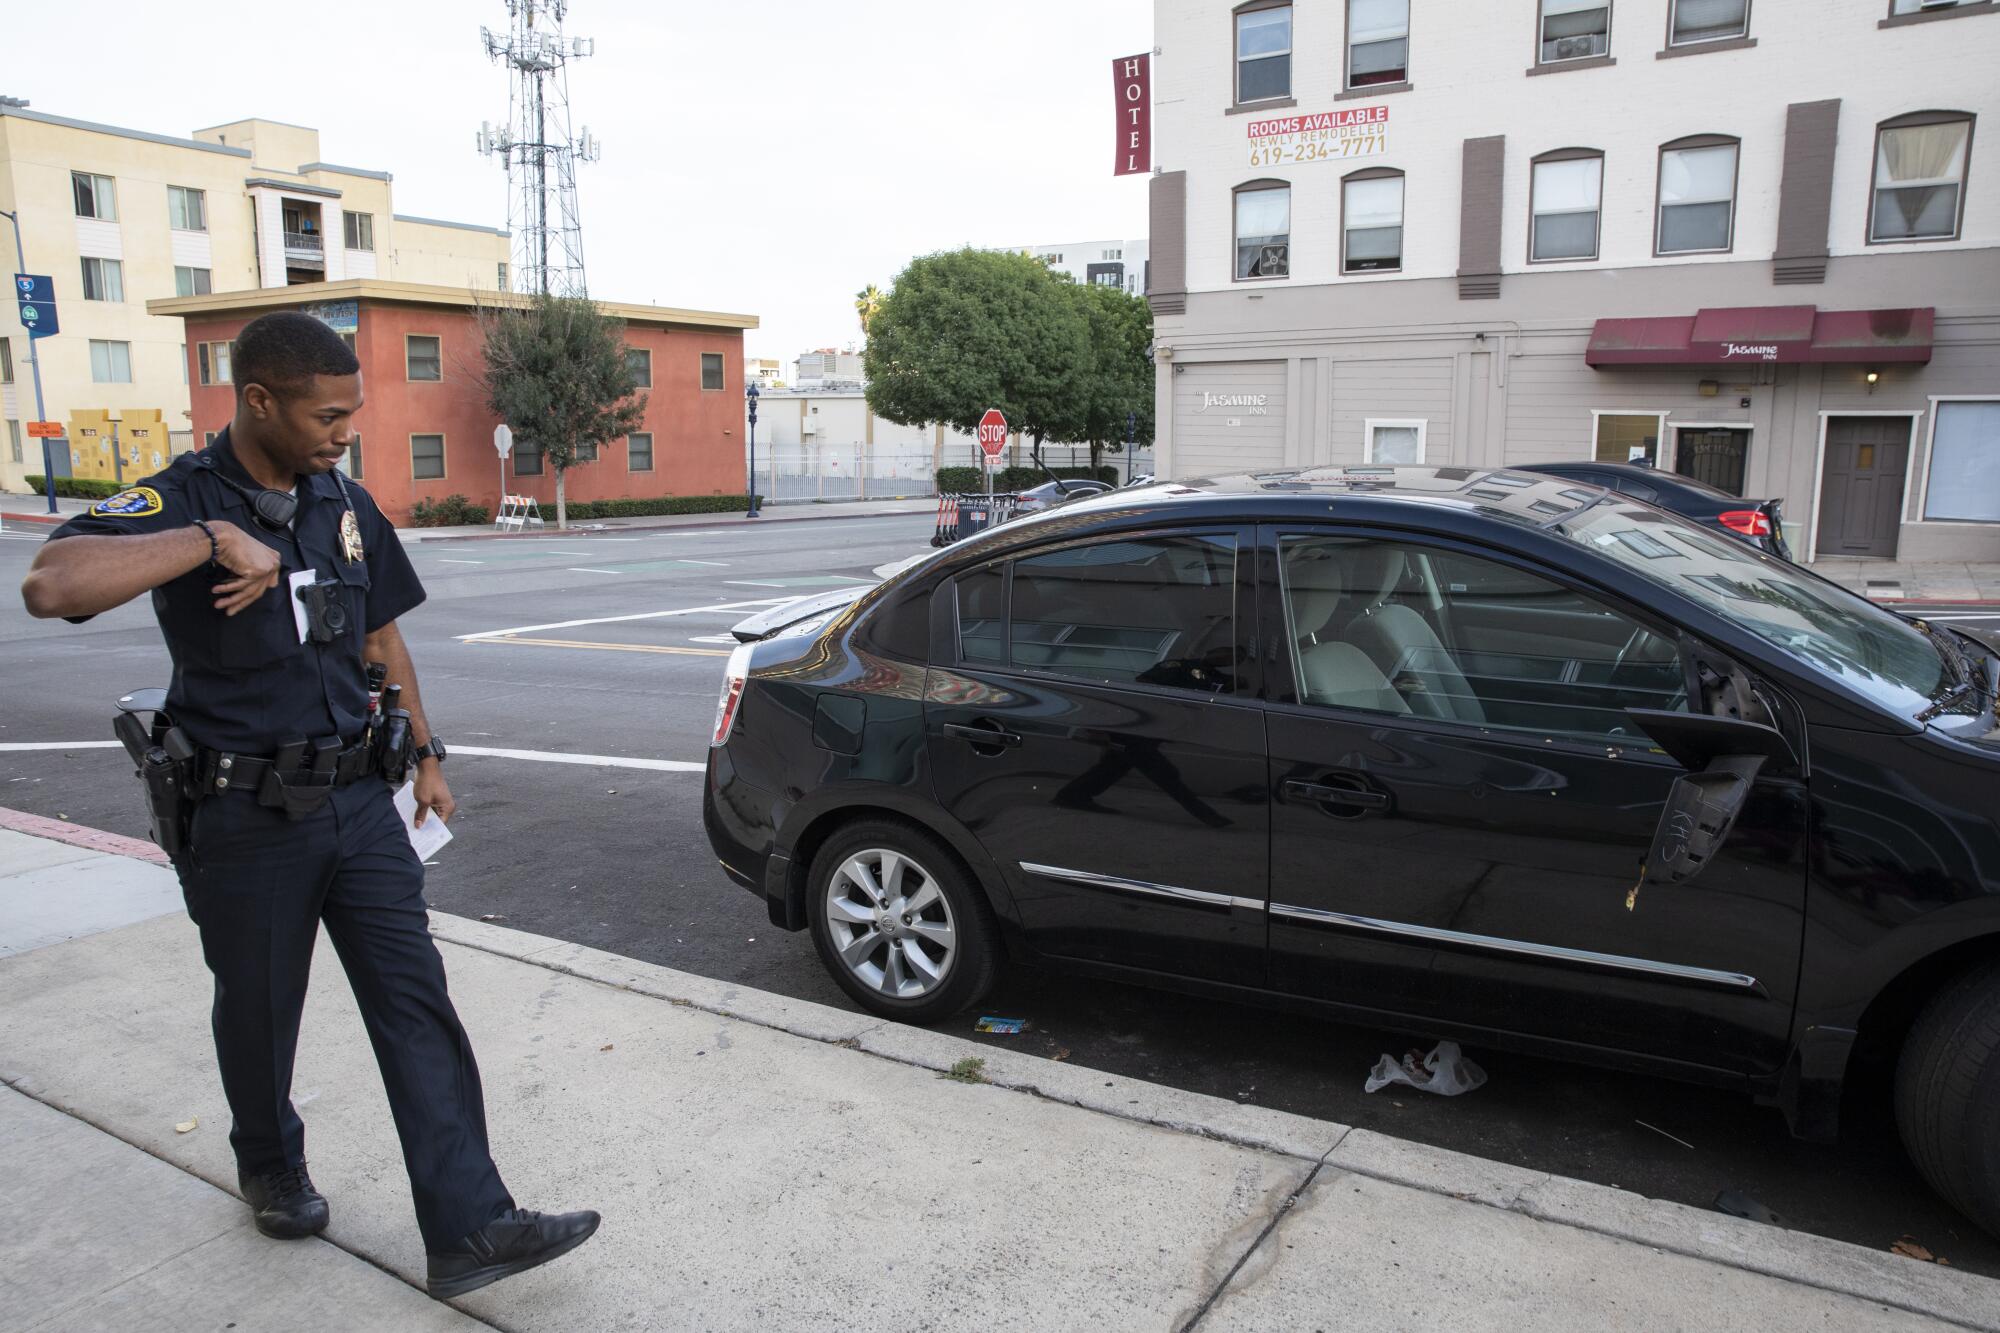 San Diego police officer Jordan Williams investigates an incident where about 12 cars were damaged.